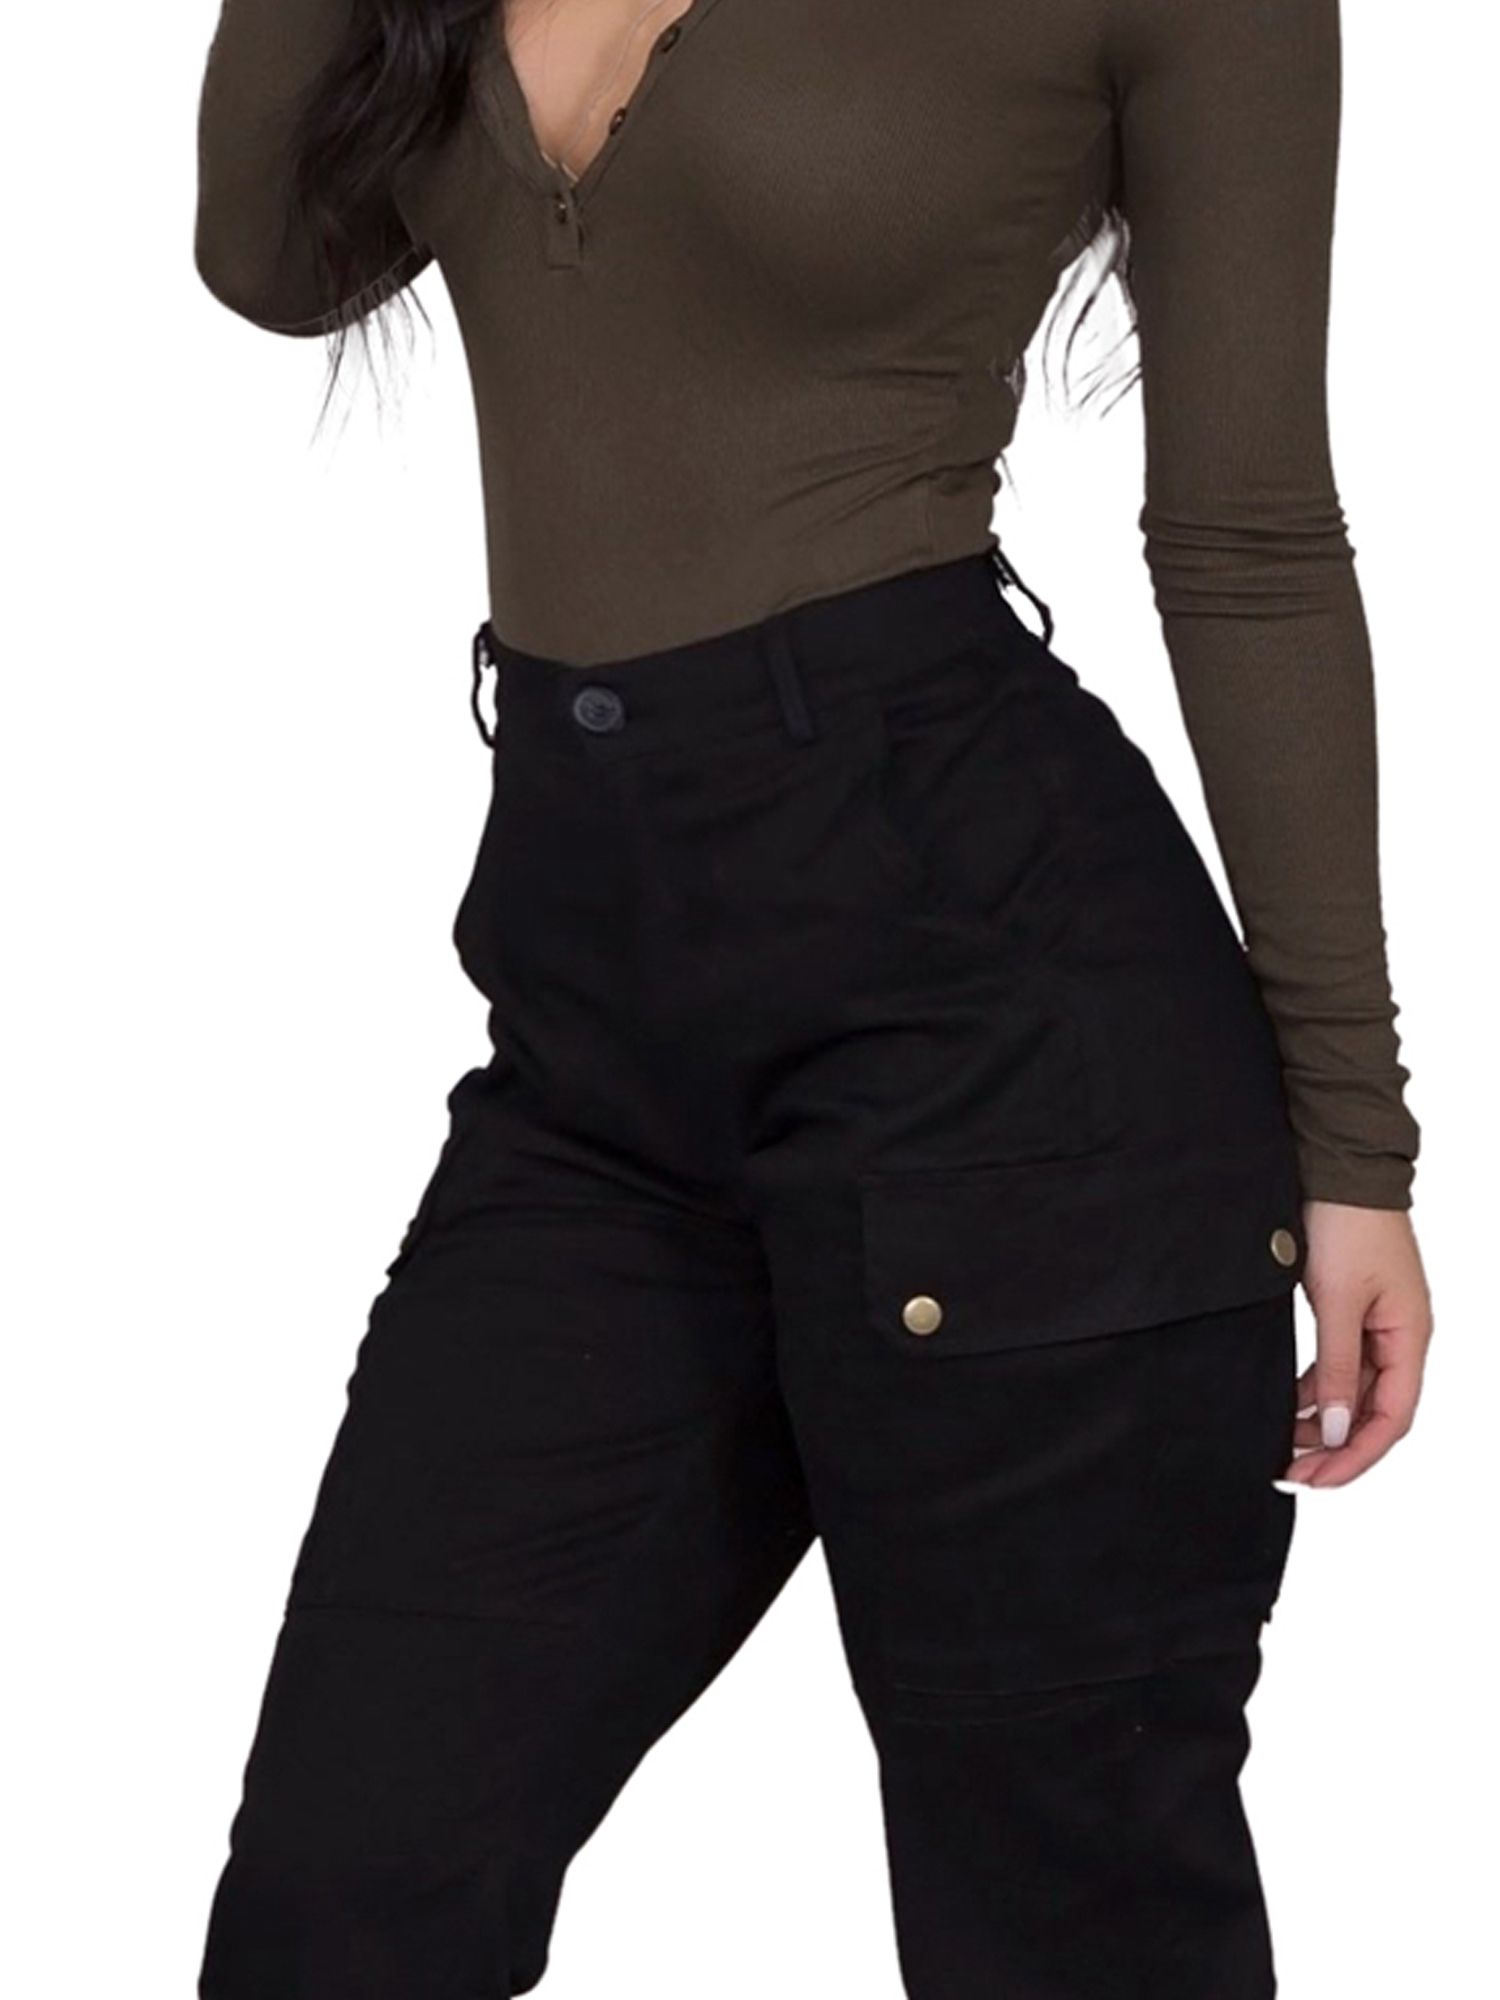 Pants for Women's Cargo Pants Straight Pants Stretch Slim Skinny Solid Trousers Casual Business Office Capris 